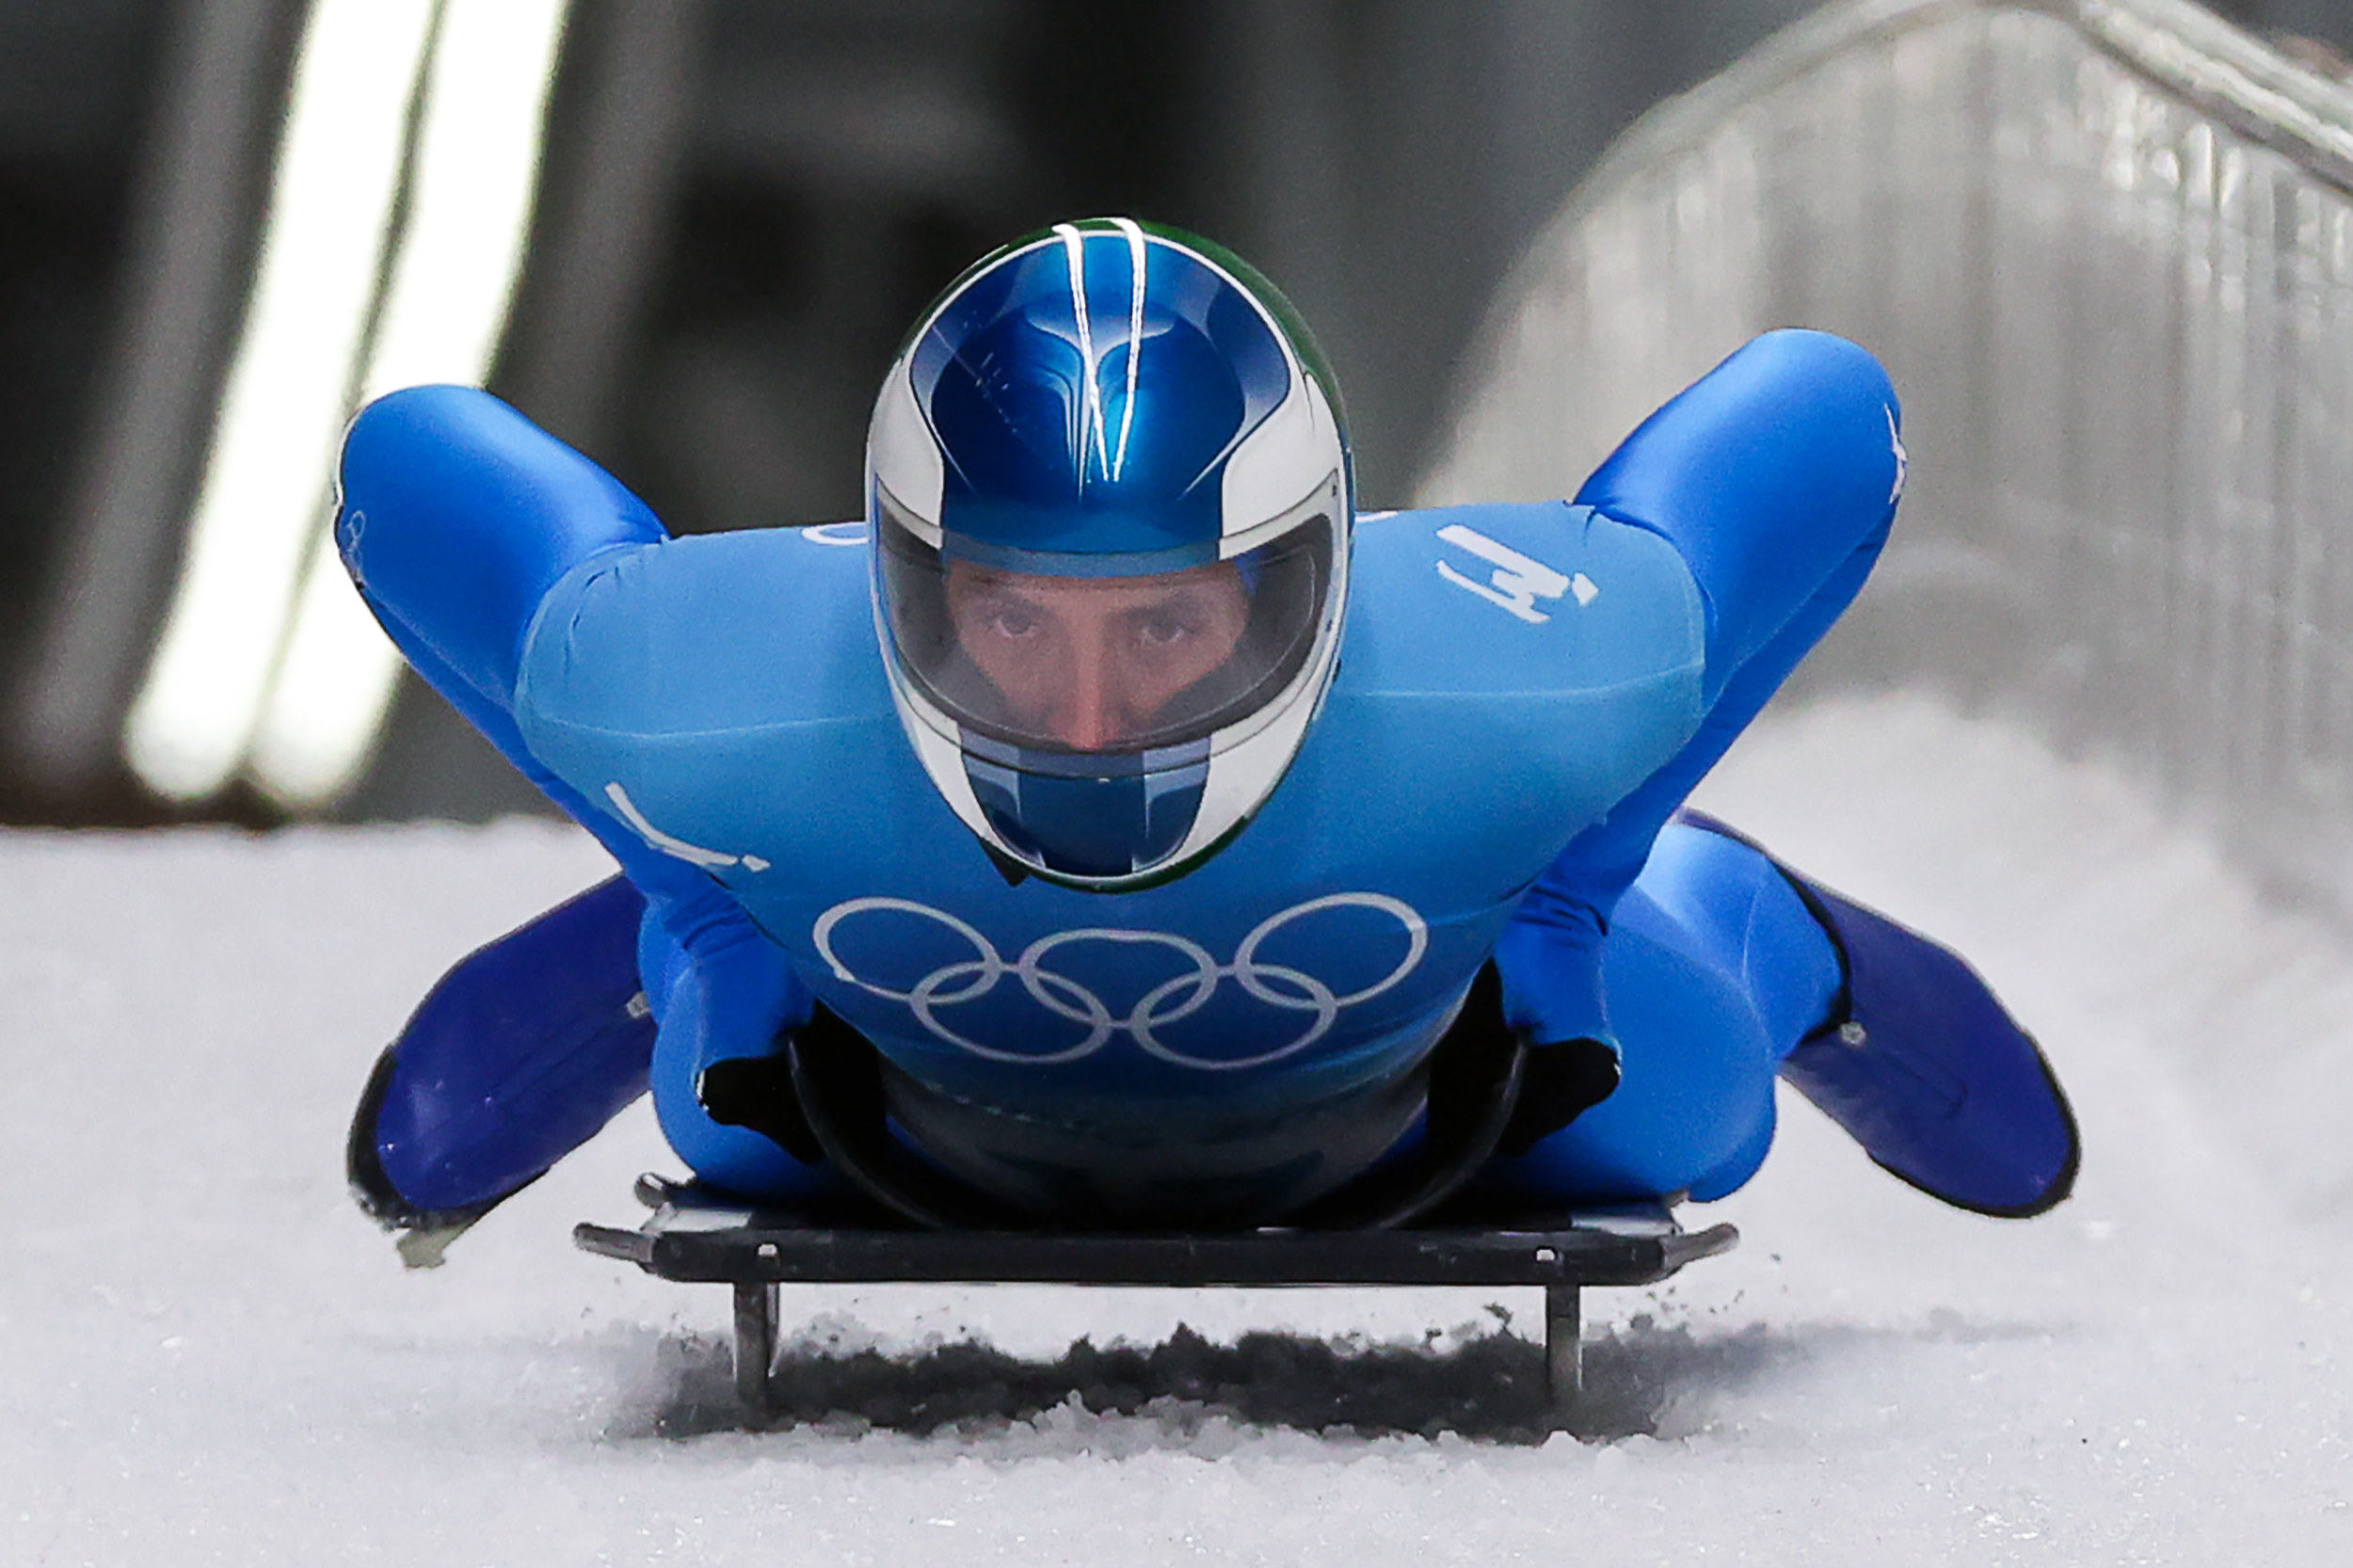 An Italian athlete on the track as he competes in the skeleton